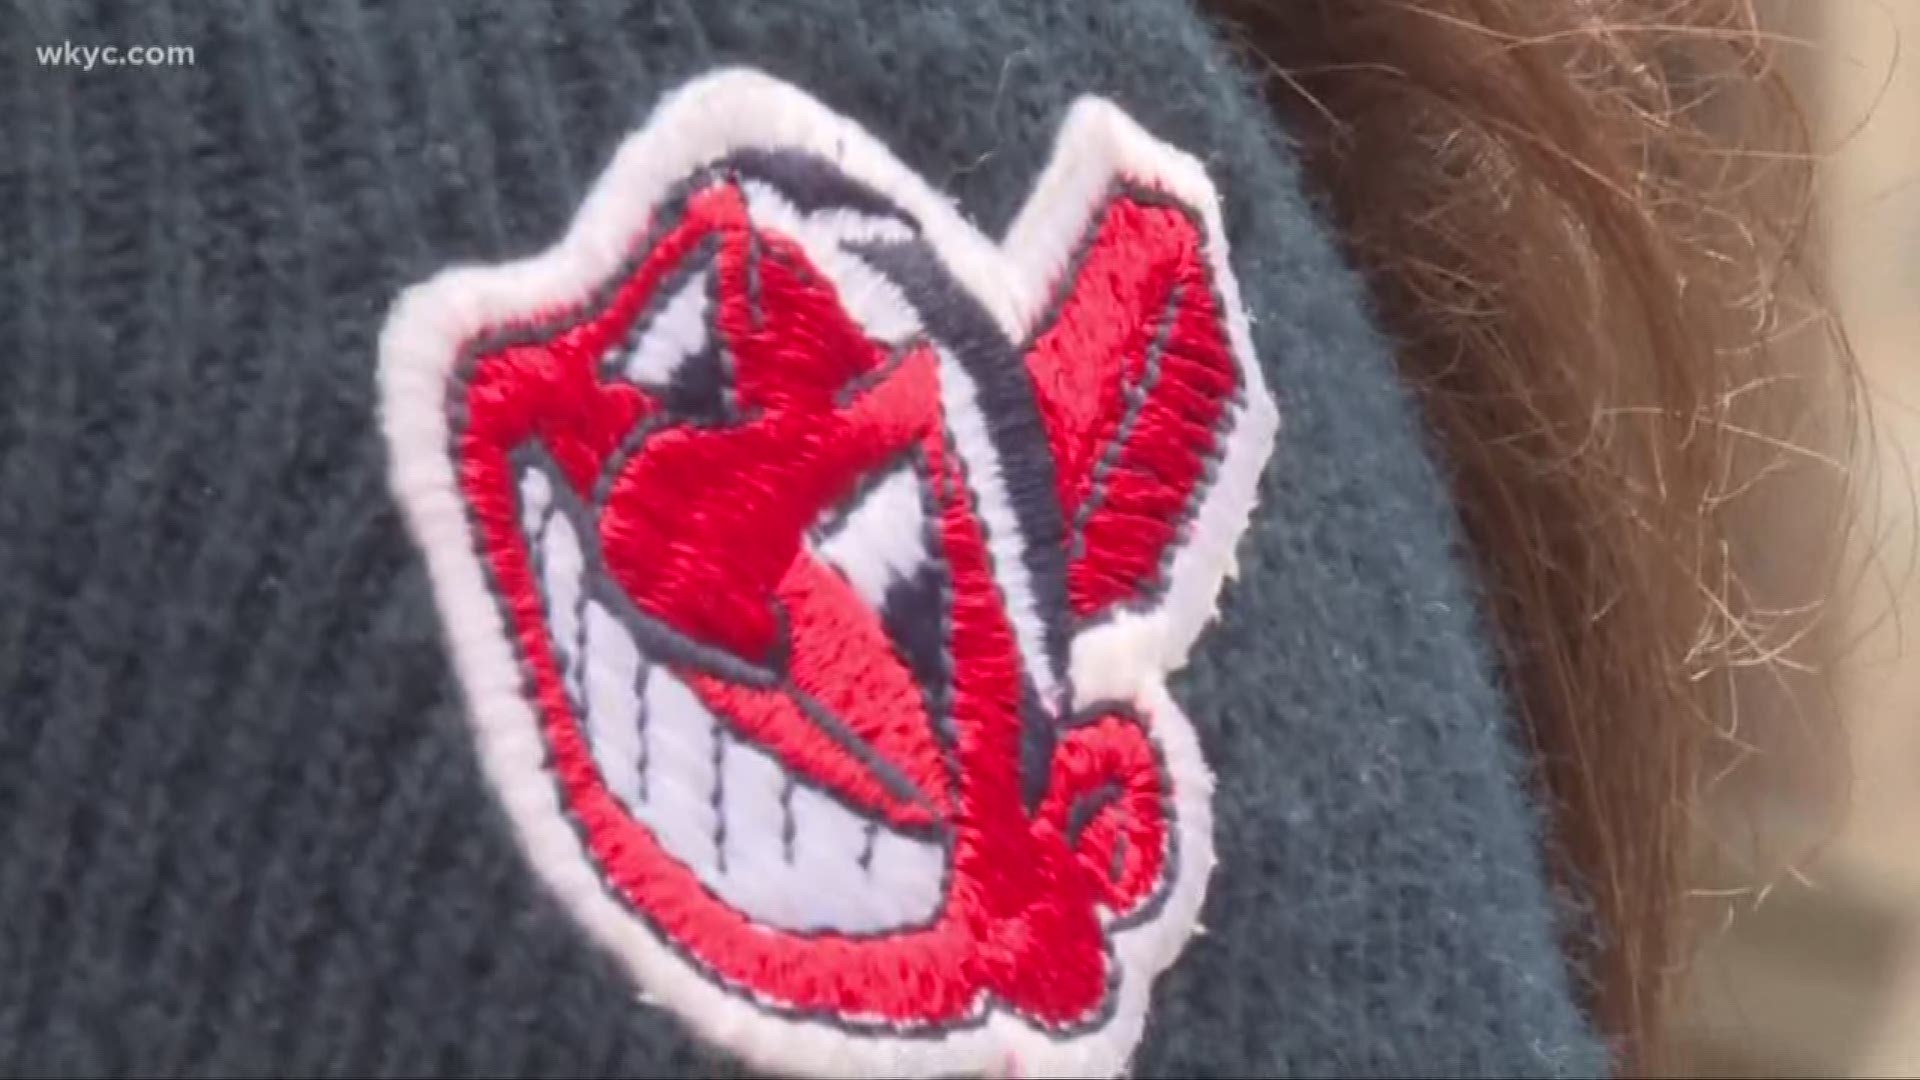 End of Cleveland Indians' season also means end for Chief Wahoo